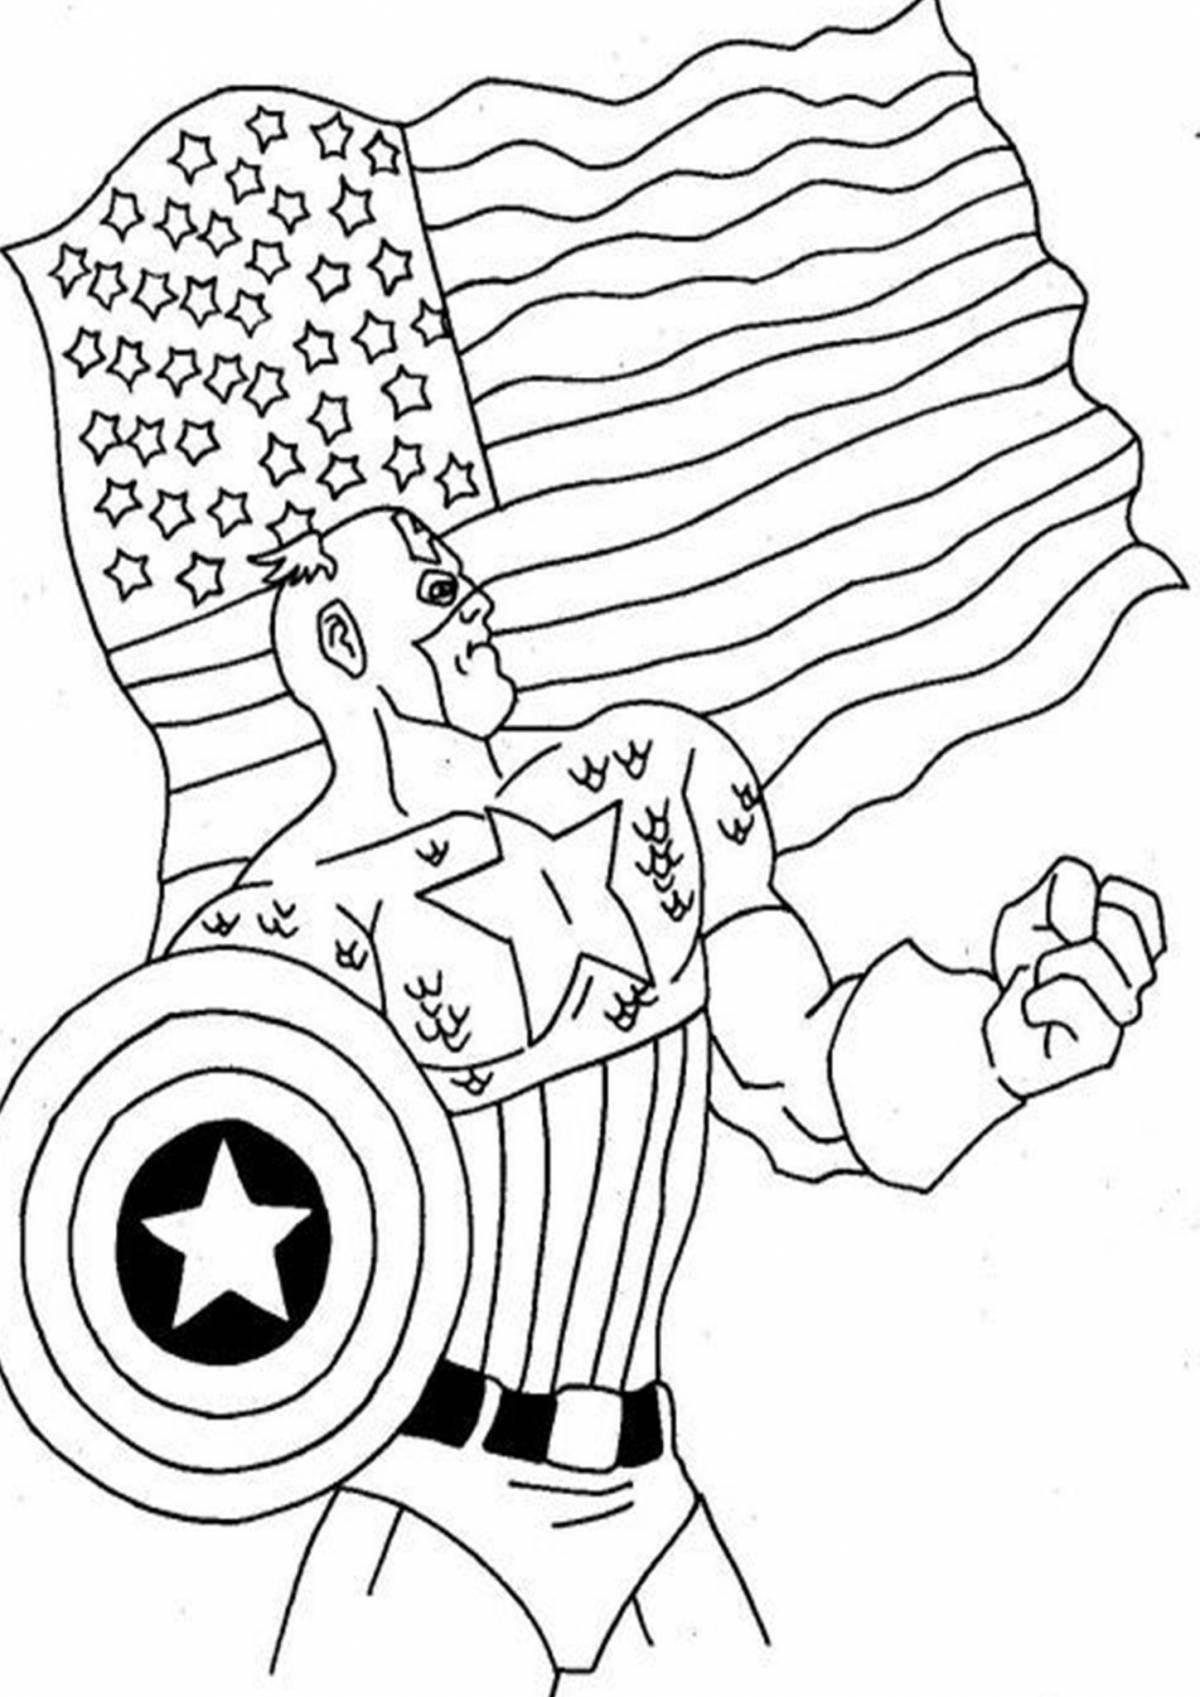 Gorgeous captain america zombie coloring book